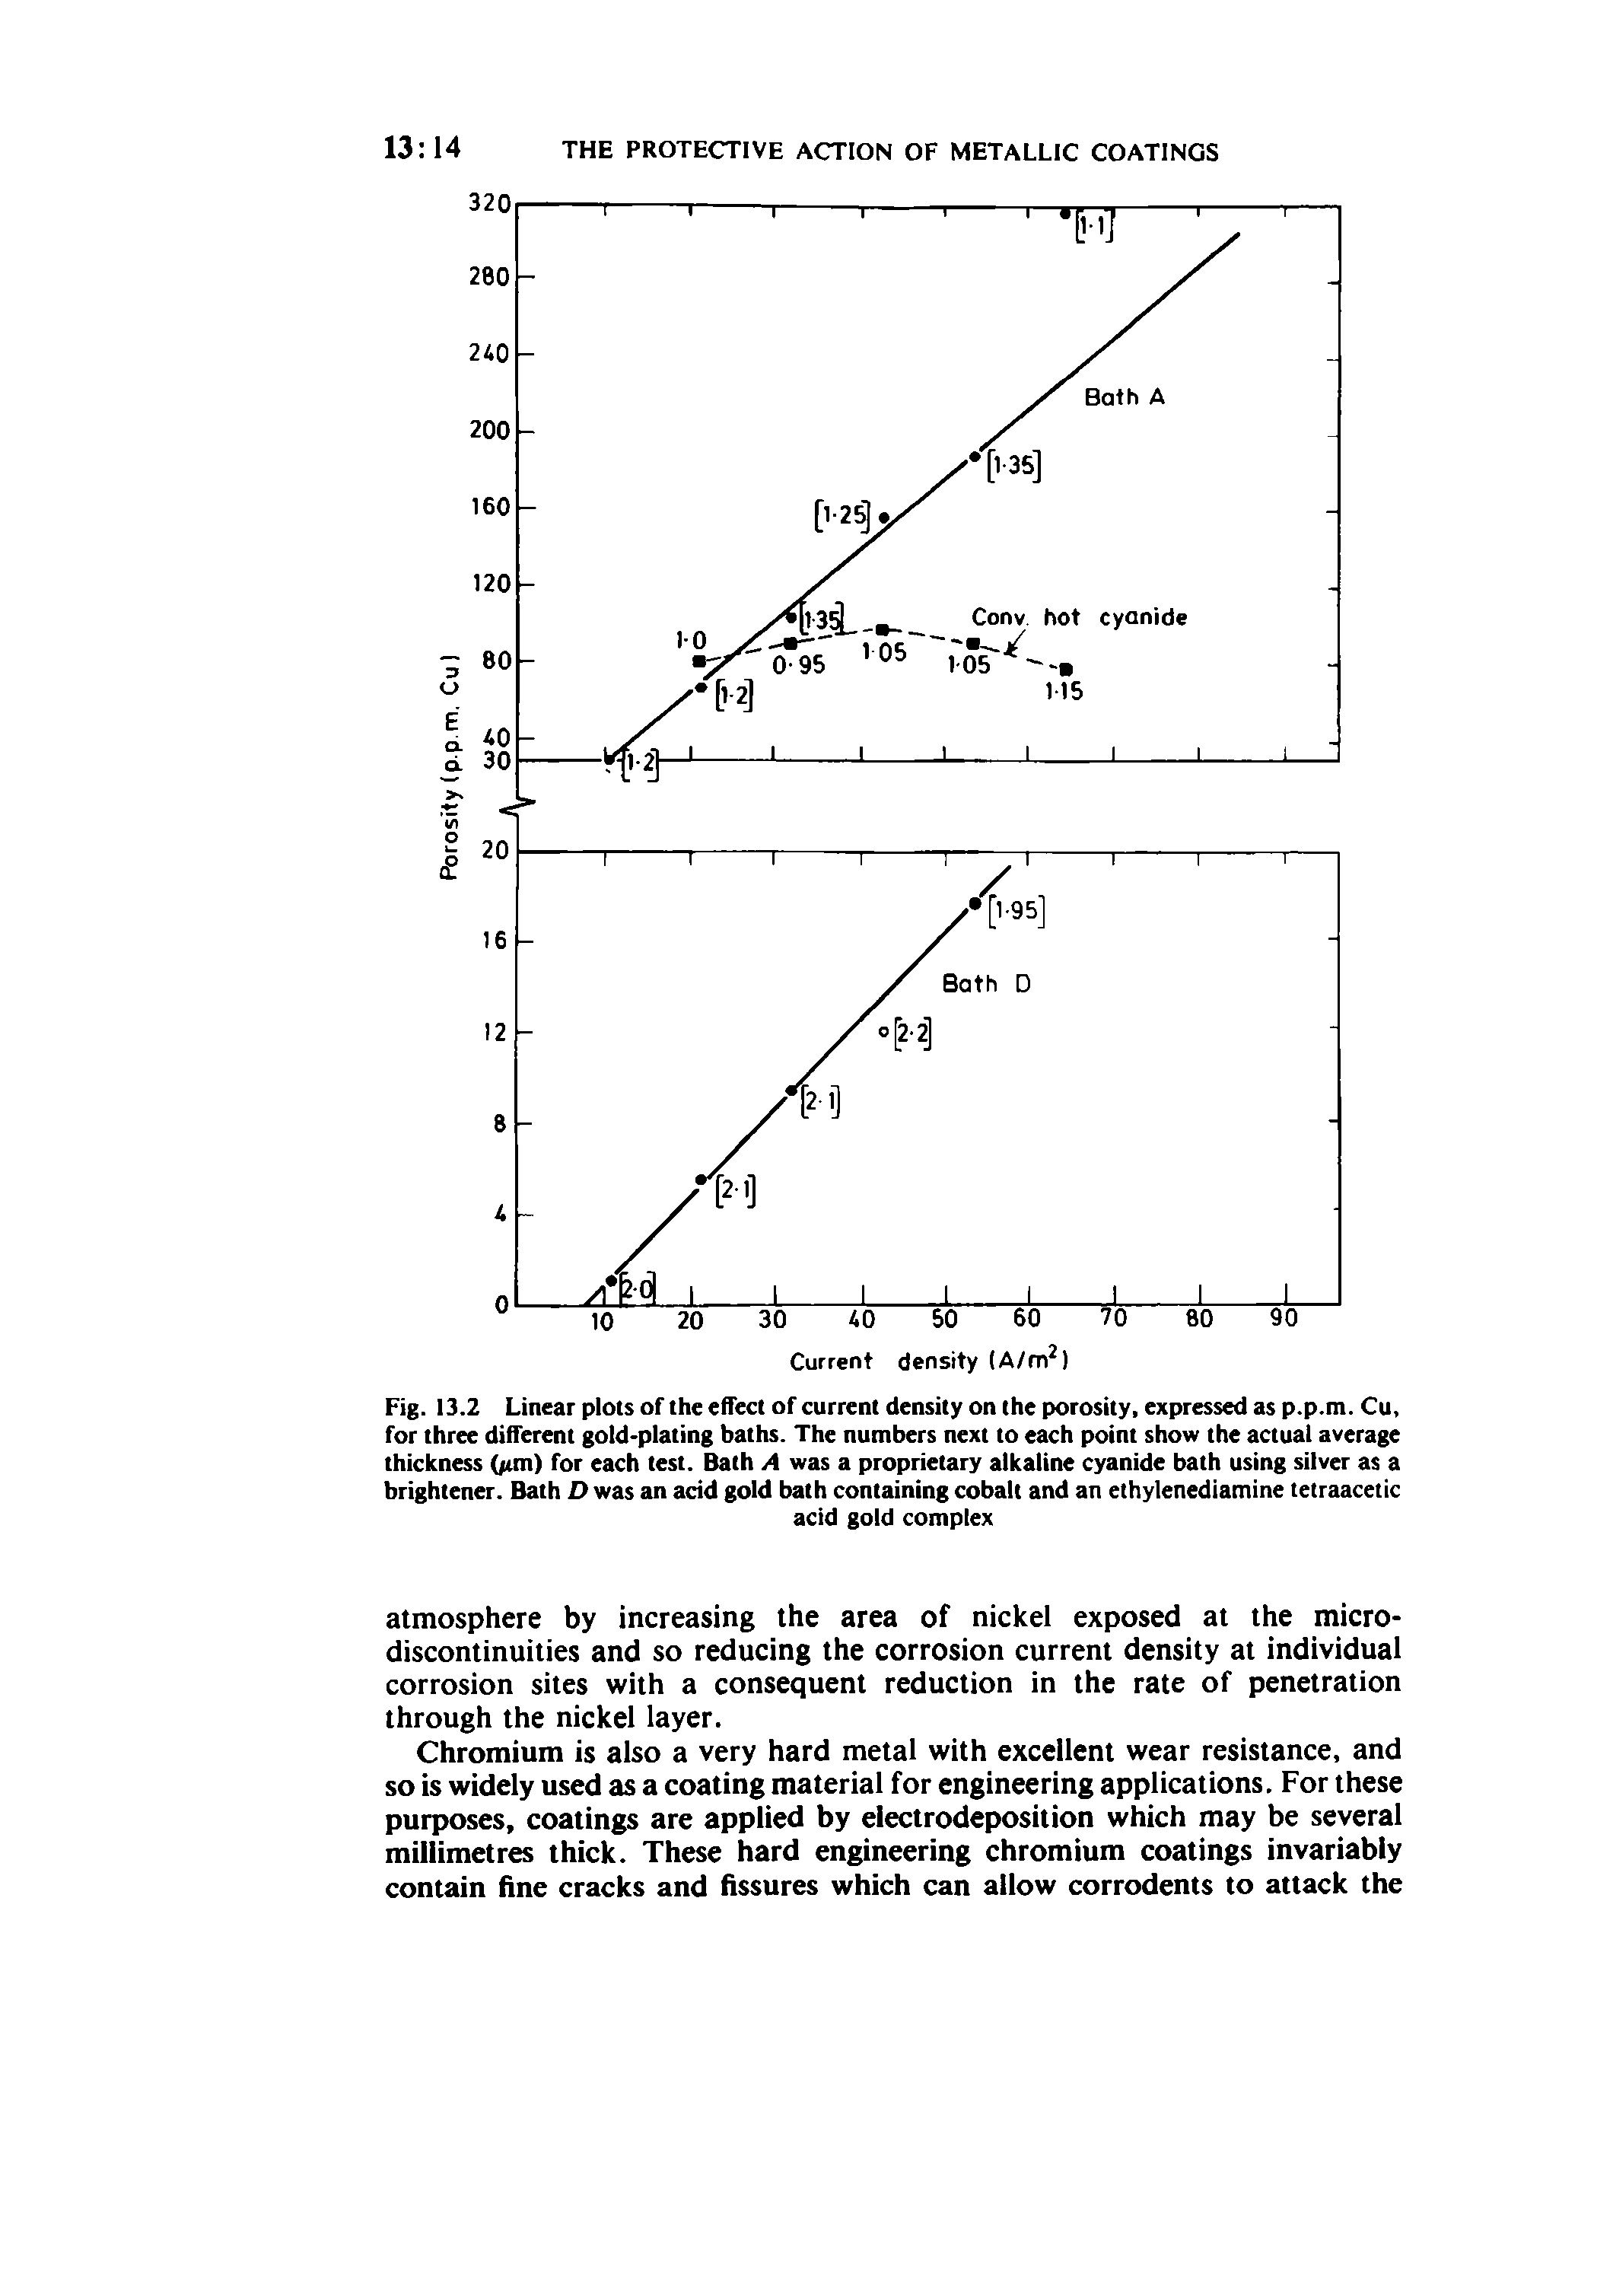 Fig. 13.2 Linear plots of the effect of current density on the porosity, expressed as p.p.m. Cu, for three different gold-plating baths. The numbers next to each point show the actual average thickness /im) for each test. Bath A was a proprietary alkaline cyanide bath using silver as a brightener. Bath D was an acid gold bath containing cobalt and an ethylenediamine tetraacetic...